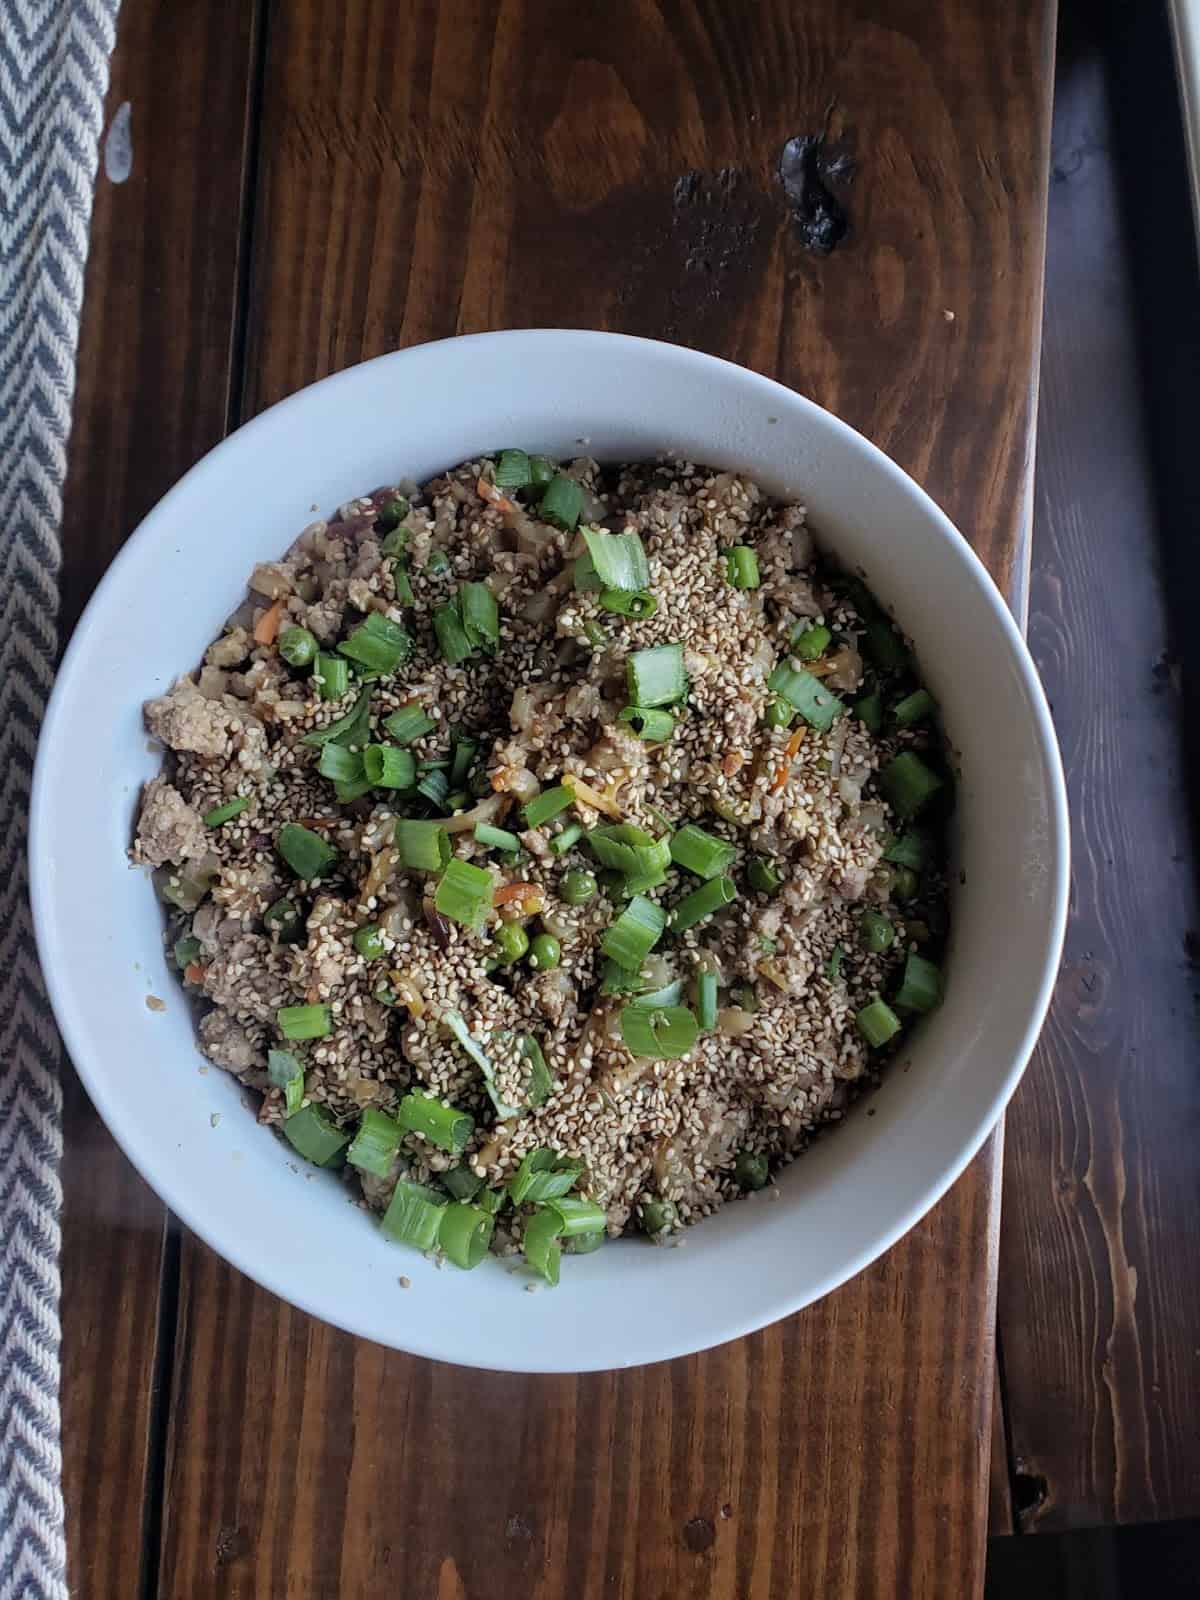 Fried Cauliflower “Rice” with Carrots, Peas, and Scallions with Ground Pork